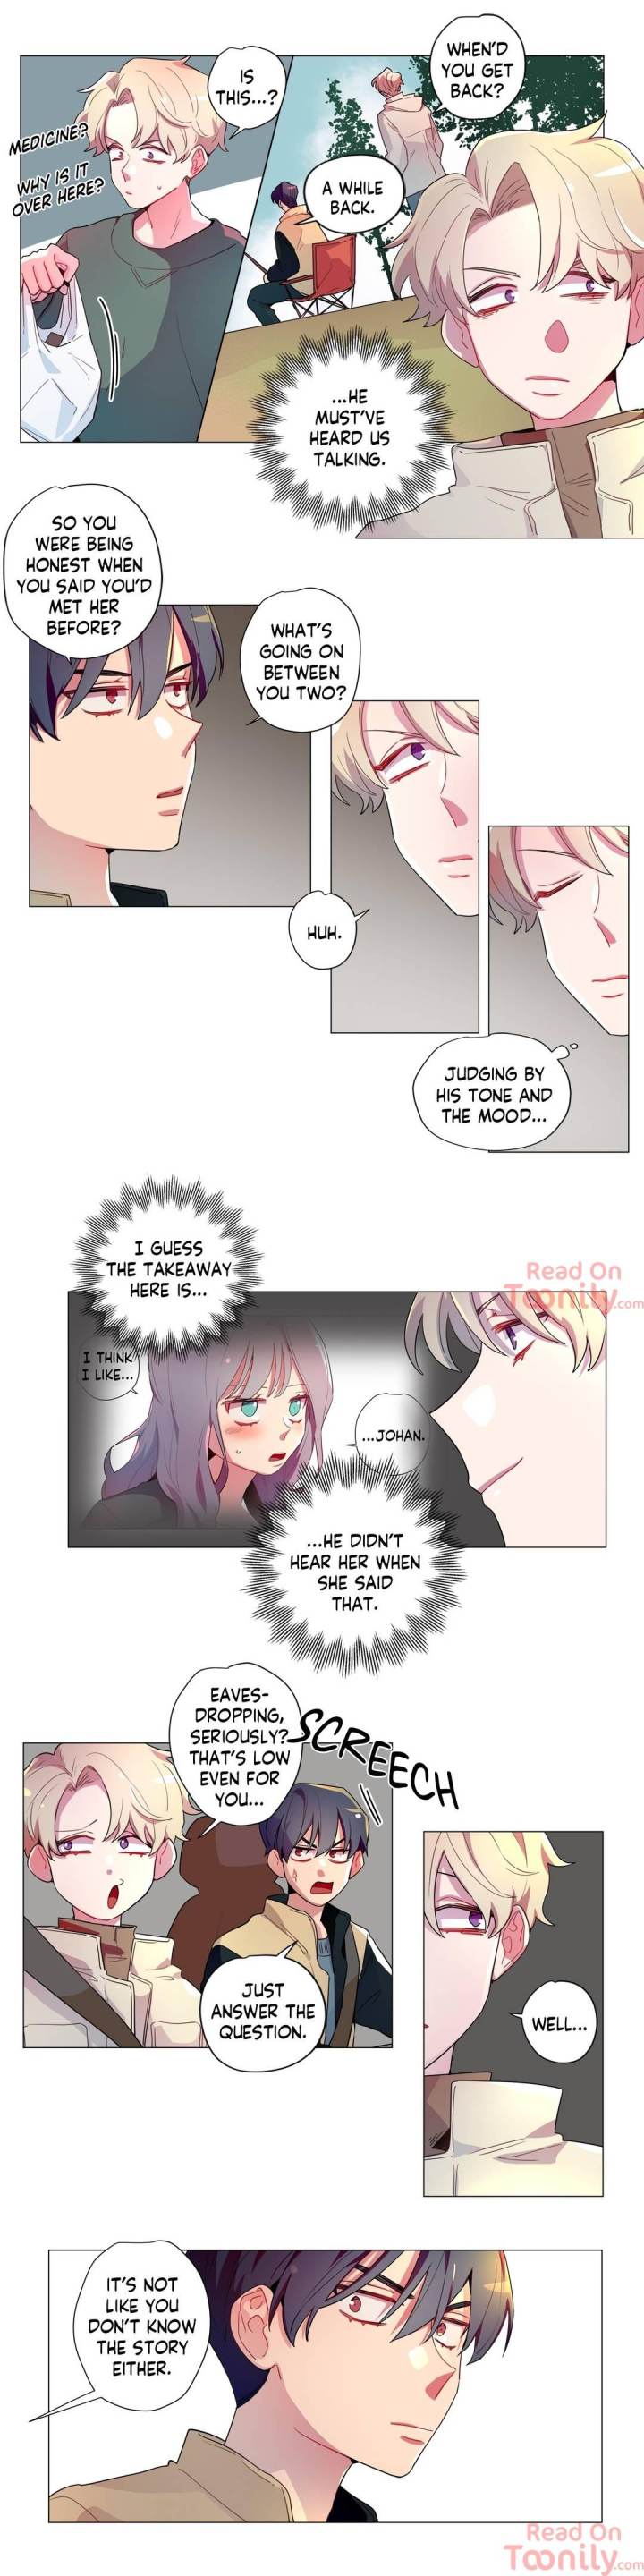 The Missing O - Chapter 39 Page 4